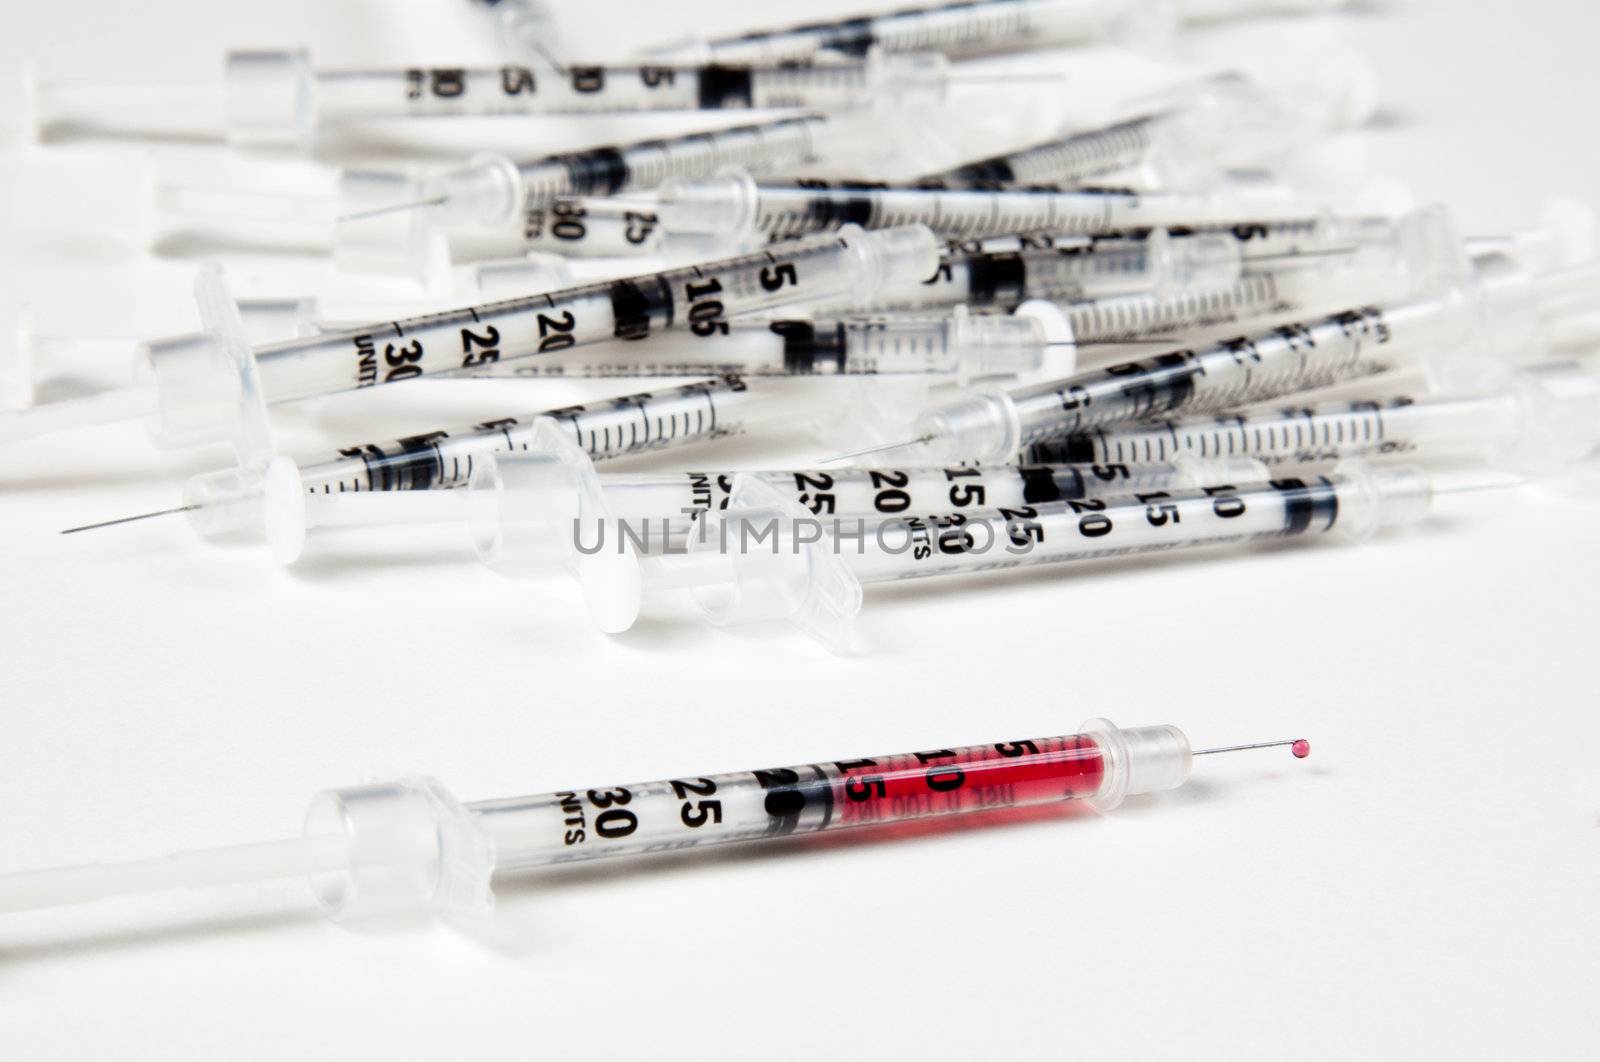 Pile of discarded injection syringes after immunization